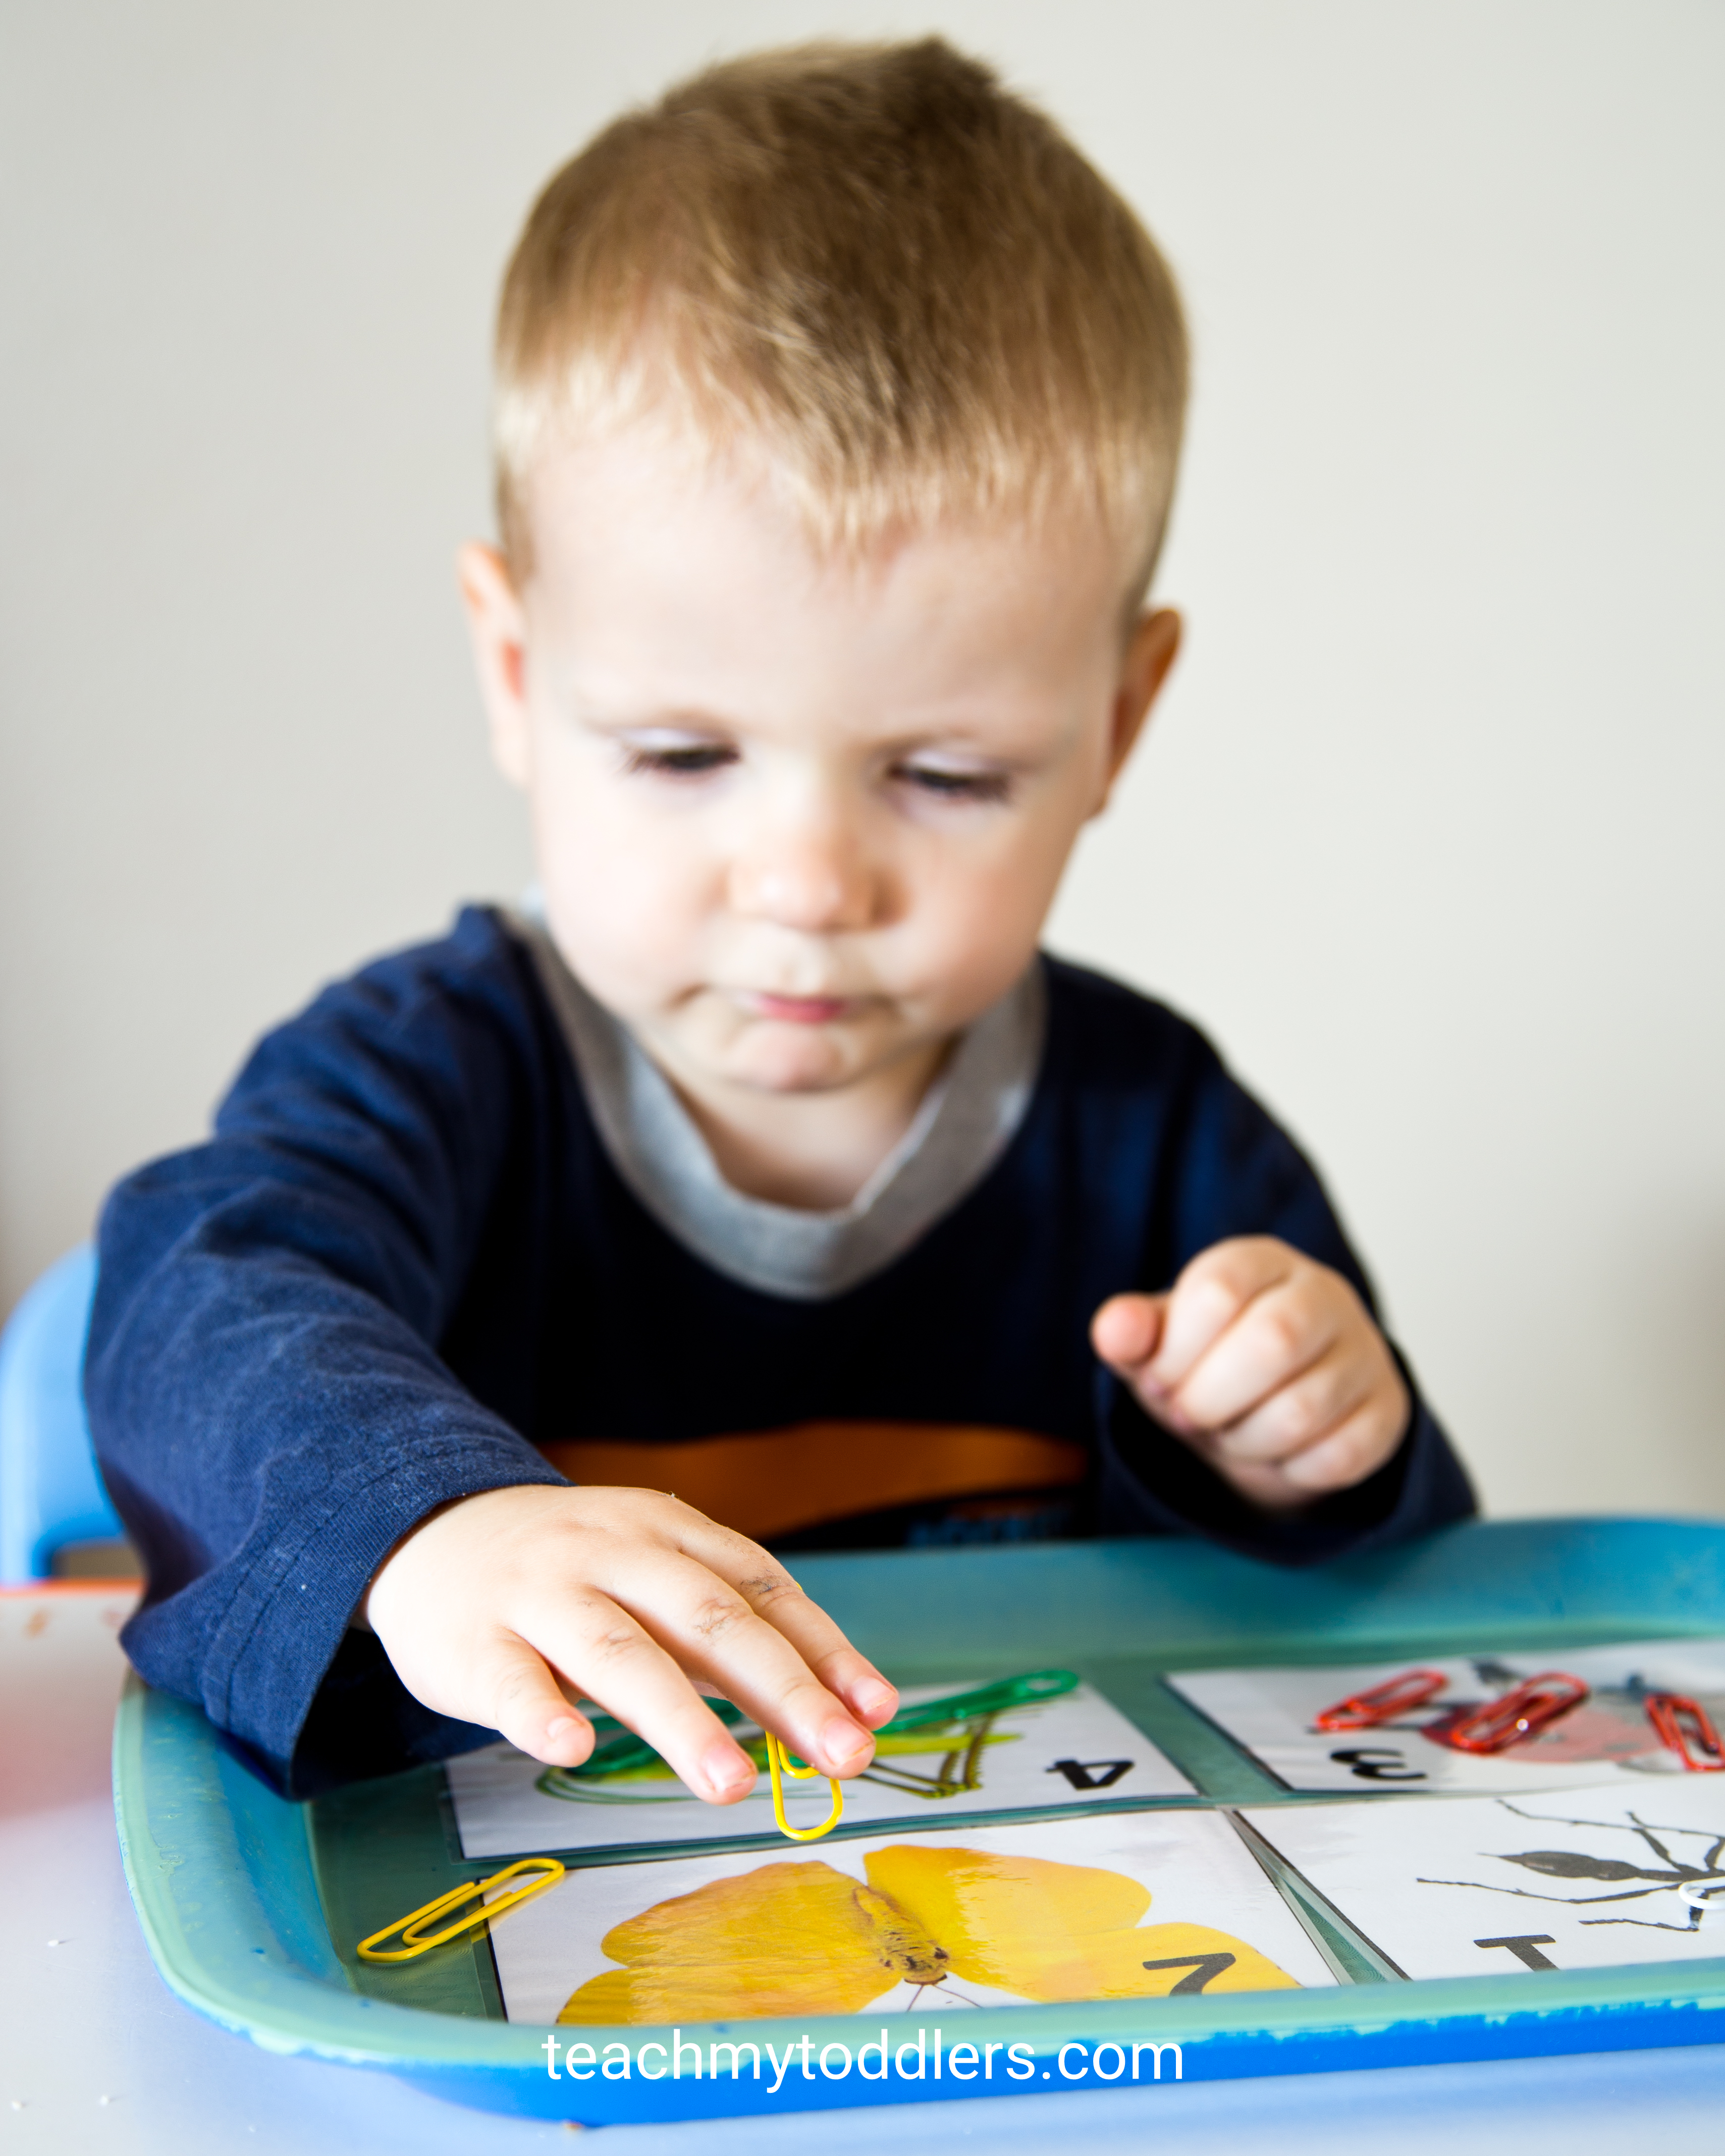 Teach your toddlers numbers with these exciting counting activities trays